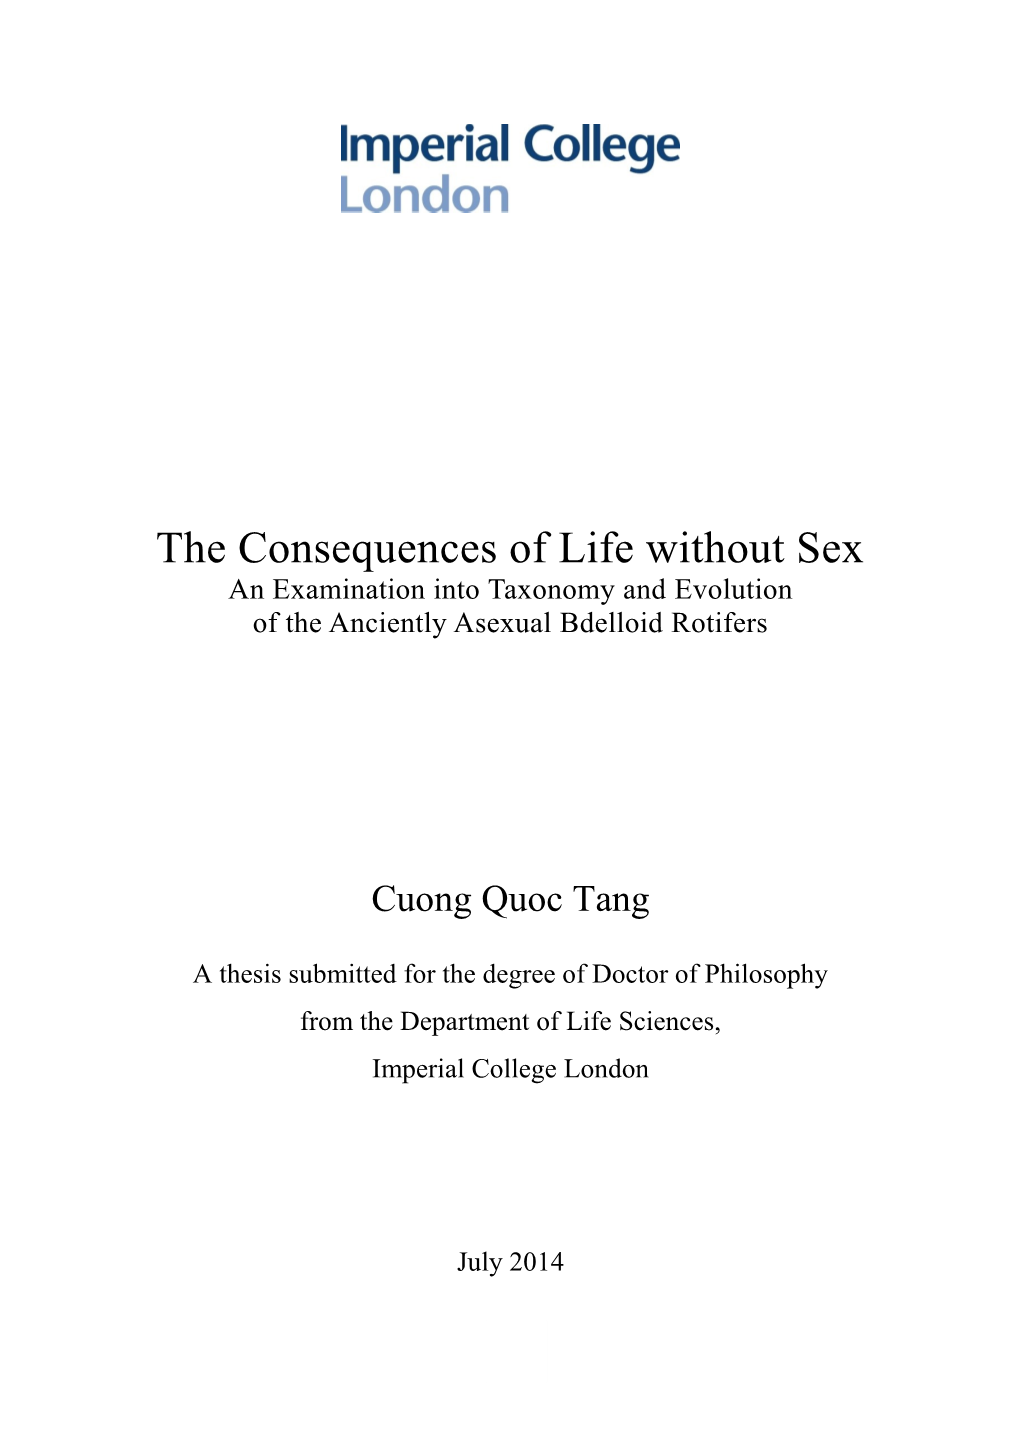 The Consequences of Life Without Sex an Examination Into Taxonomy and Evolution of the Anciently Asexual Bdelloid Rotifers